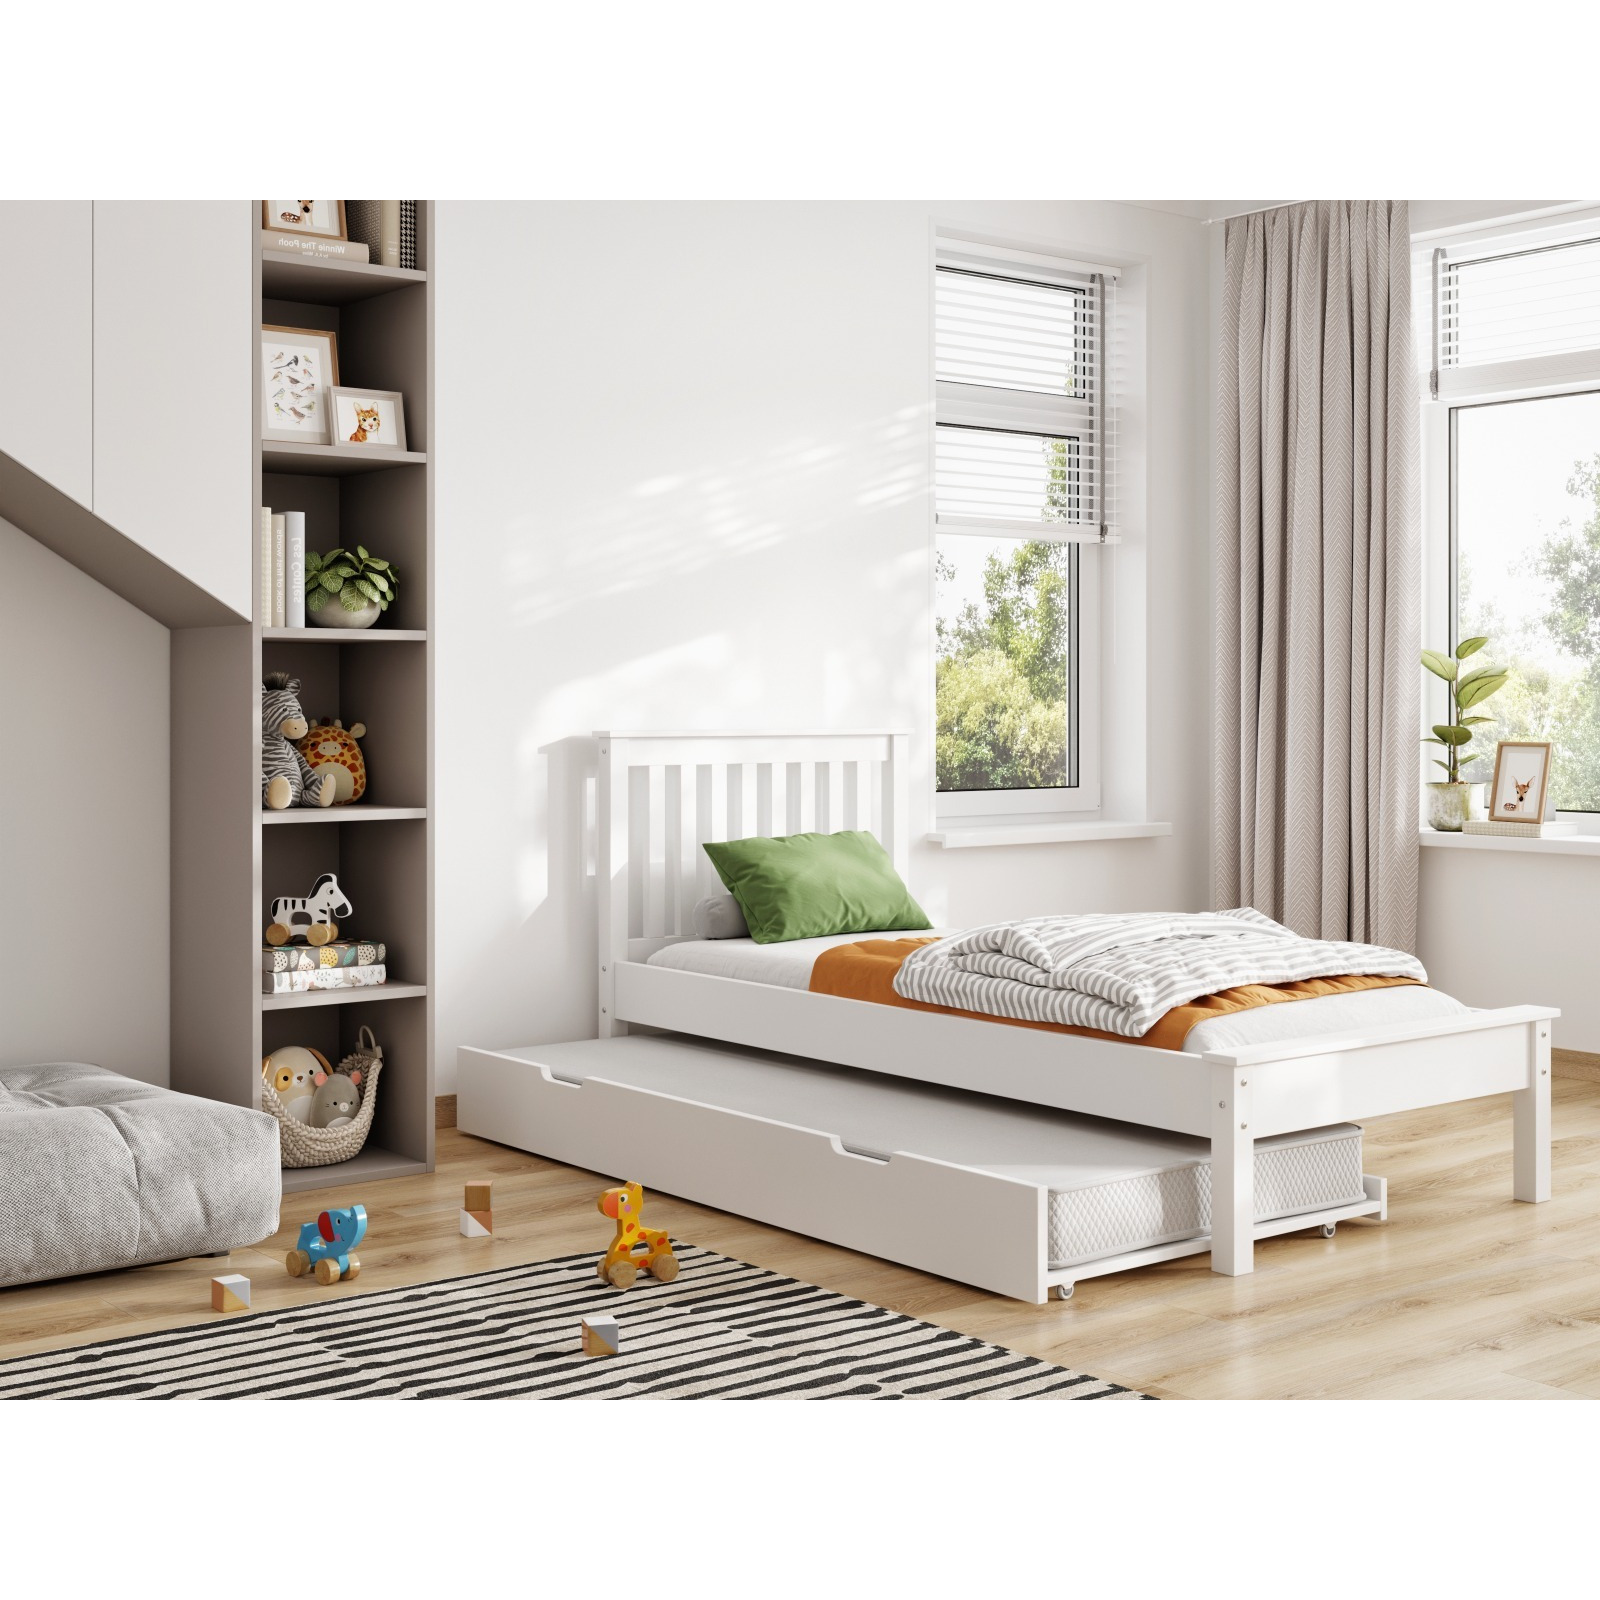 Flair Disley Solid Wood Single Guest Bed with Trundle - White - image 1